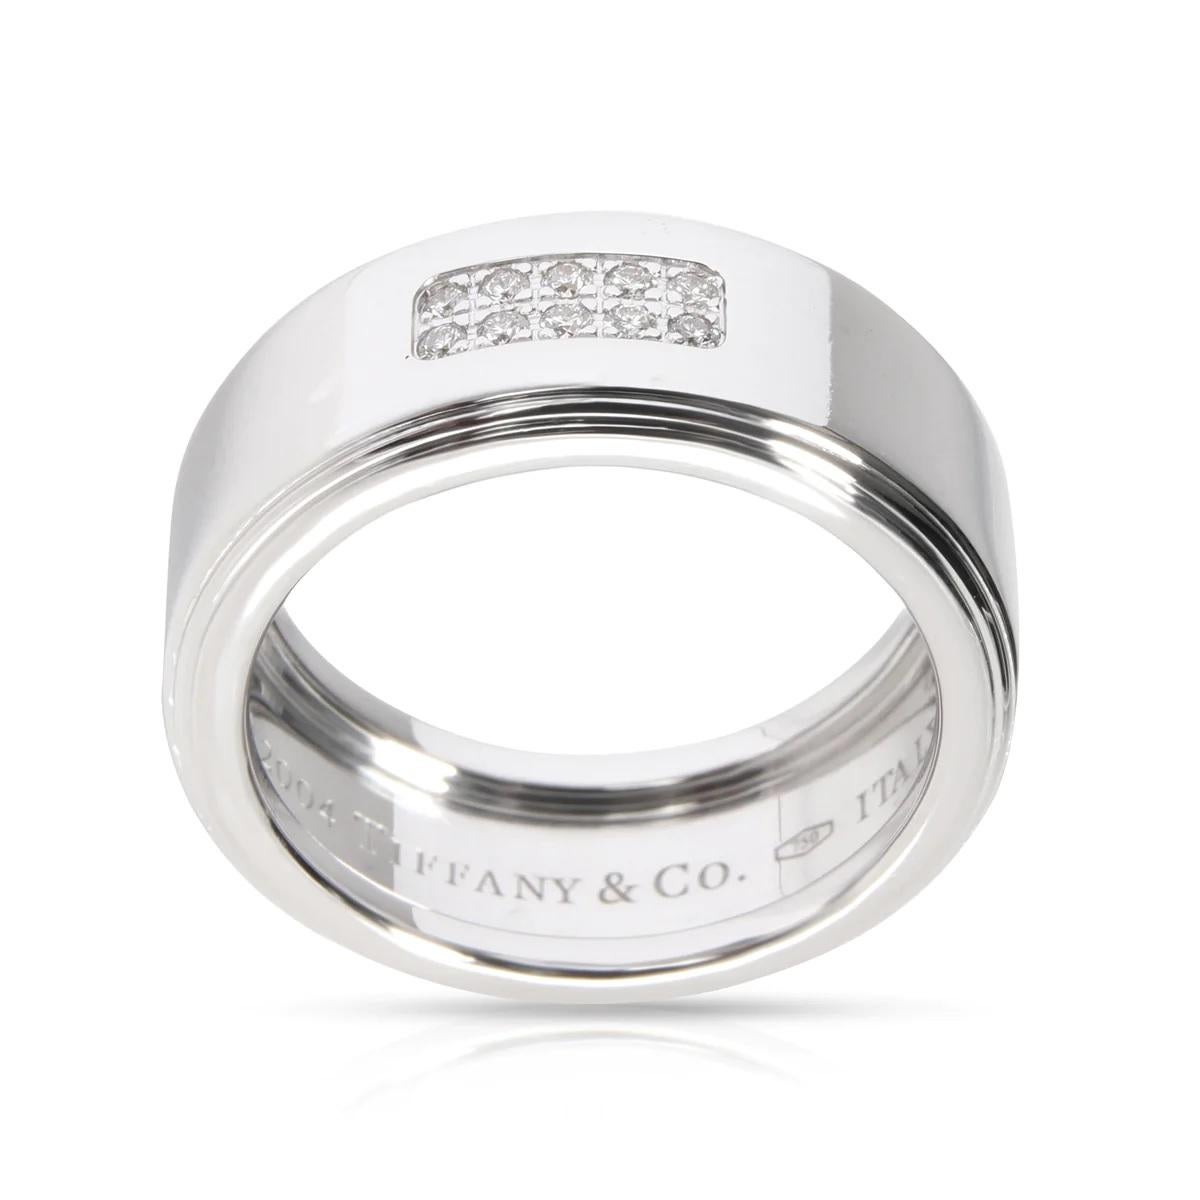 NEW with Tags, Tag price $4500

TIFFANY & CO BAND, Century Collection, stamped © Tiffany & Co.    750   ITALY

High quality White Diamond, 0.1 CT

The ring is size 9 US size and can be re-sized by your local jeweler.

18K White gold, stamped